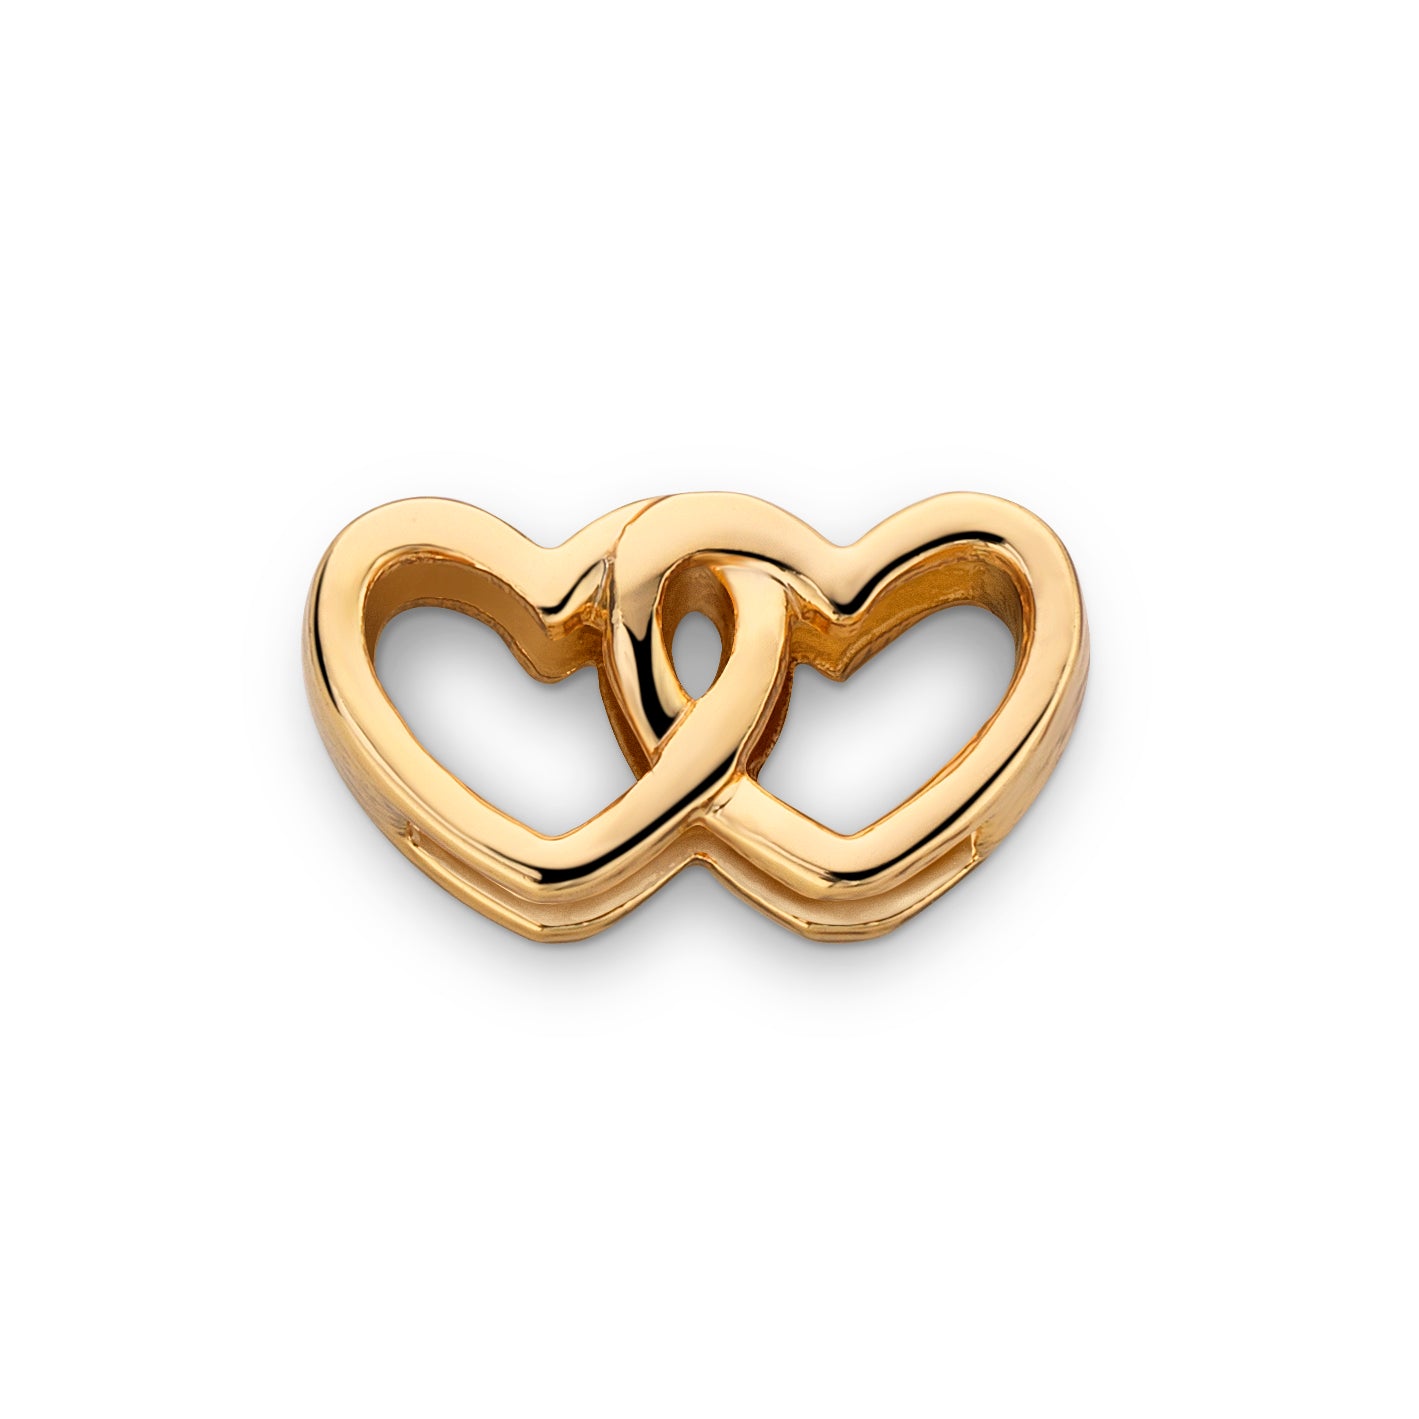 Mesh charm double heart gold